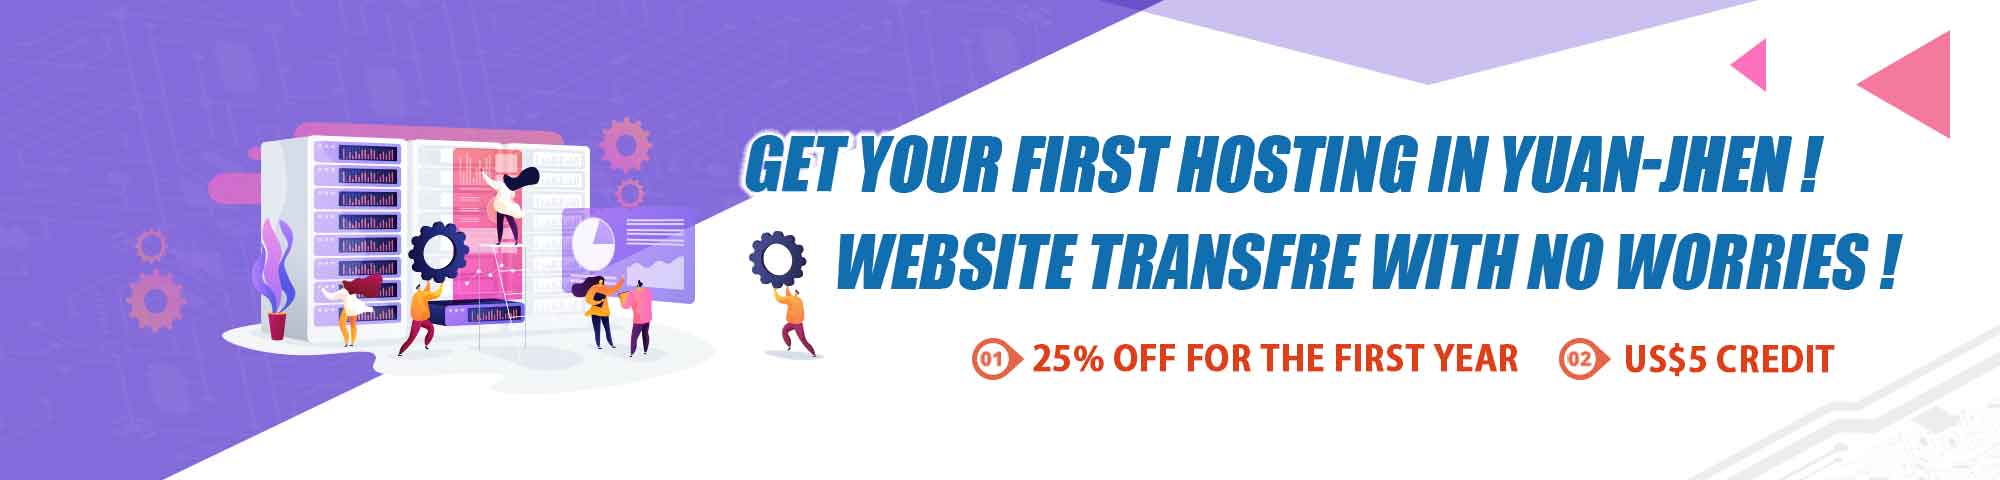 first choice to purchase web hosting｜Yuan-Jhen